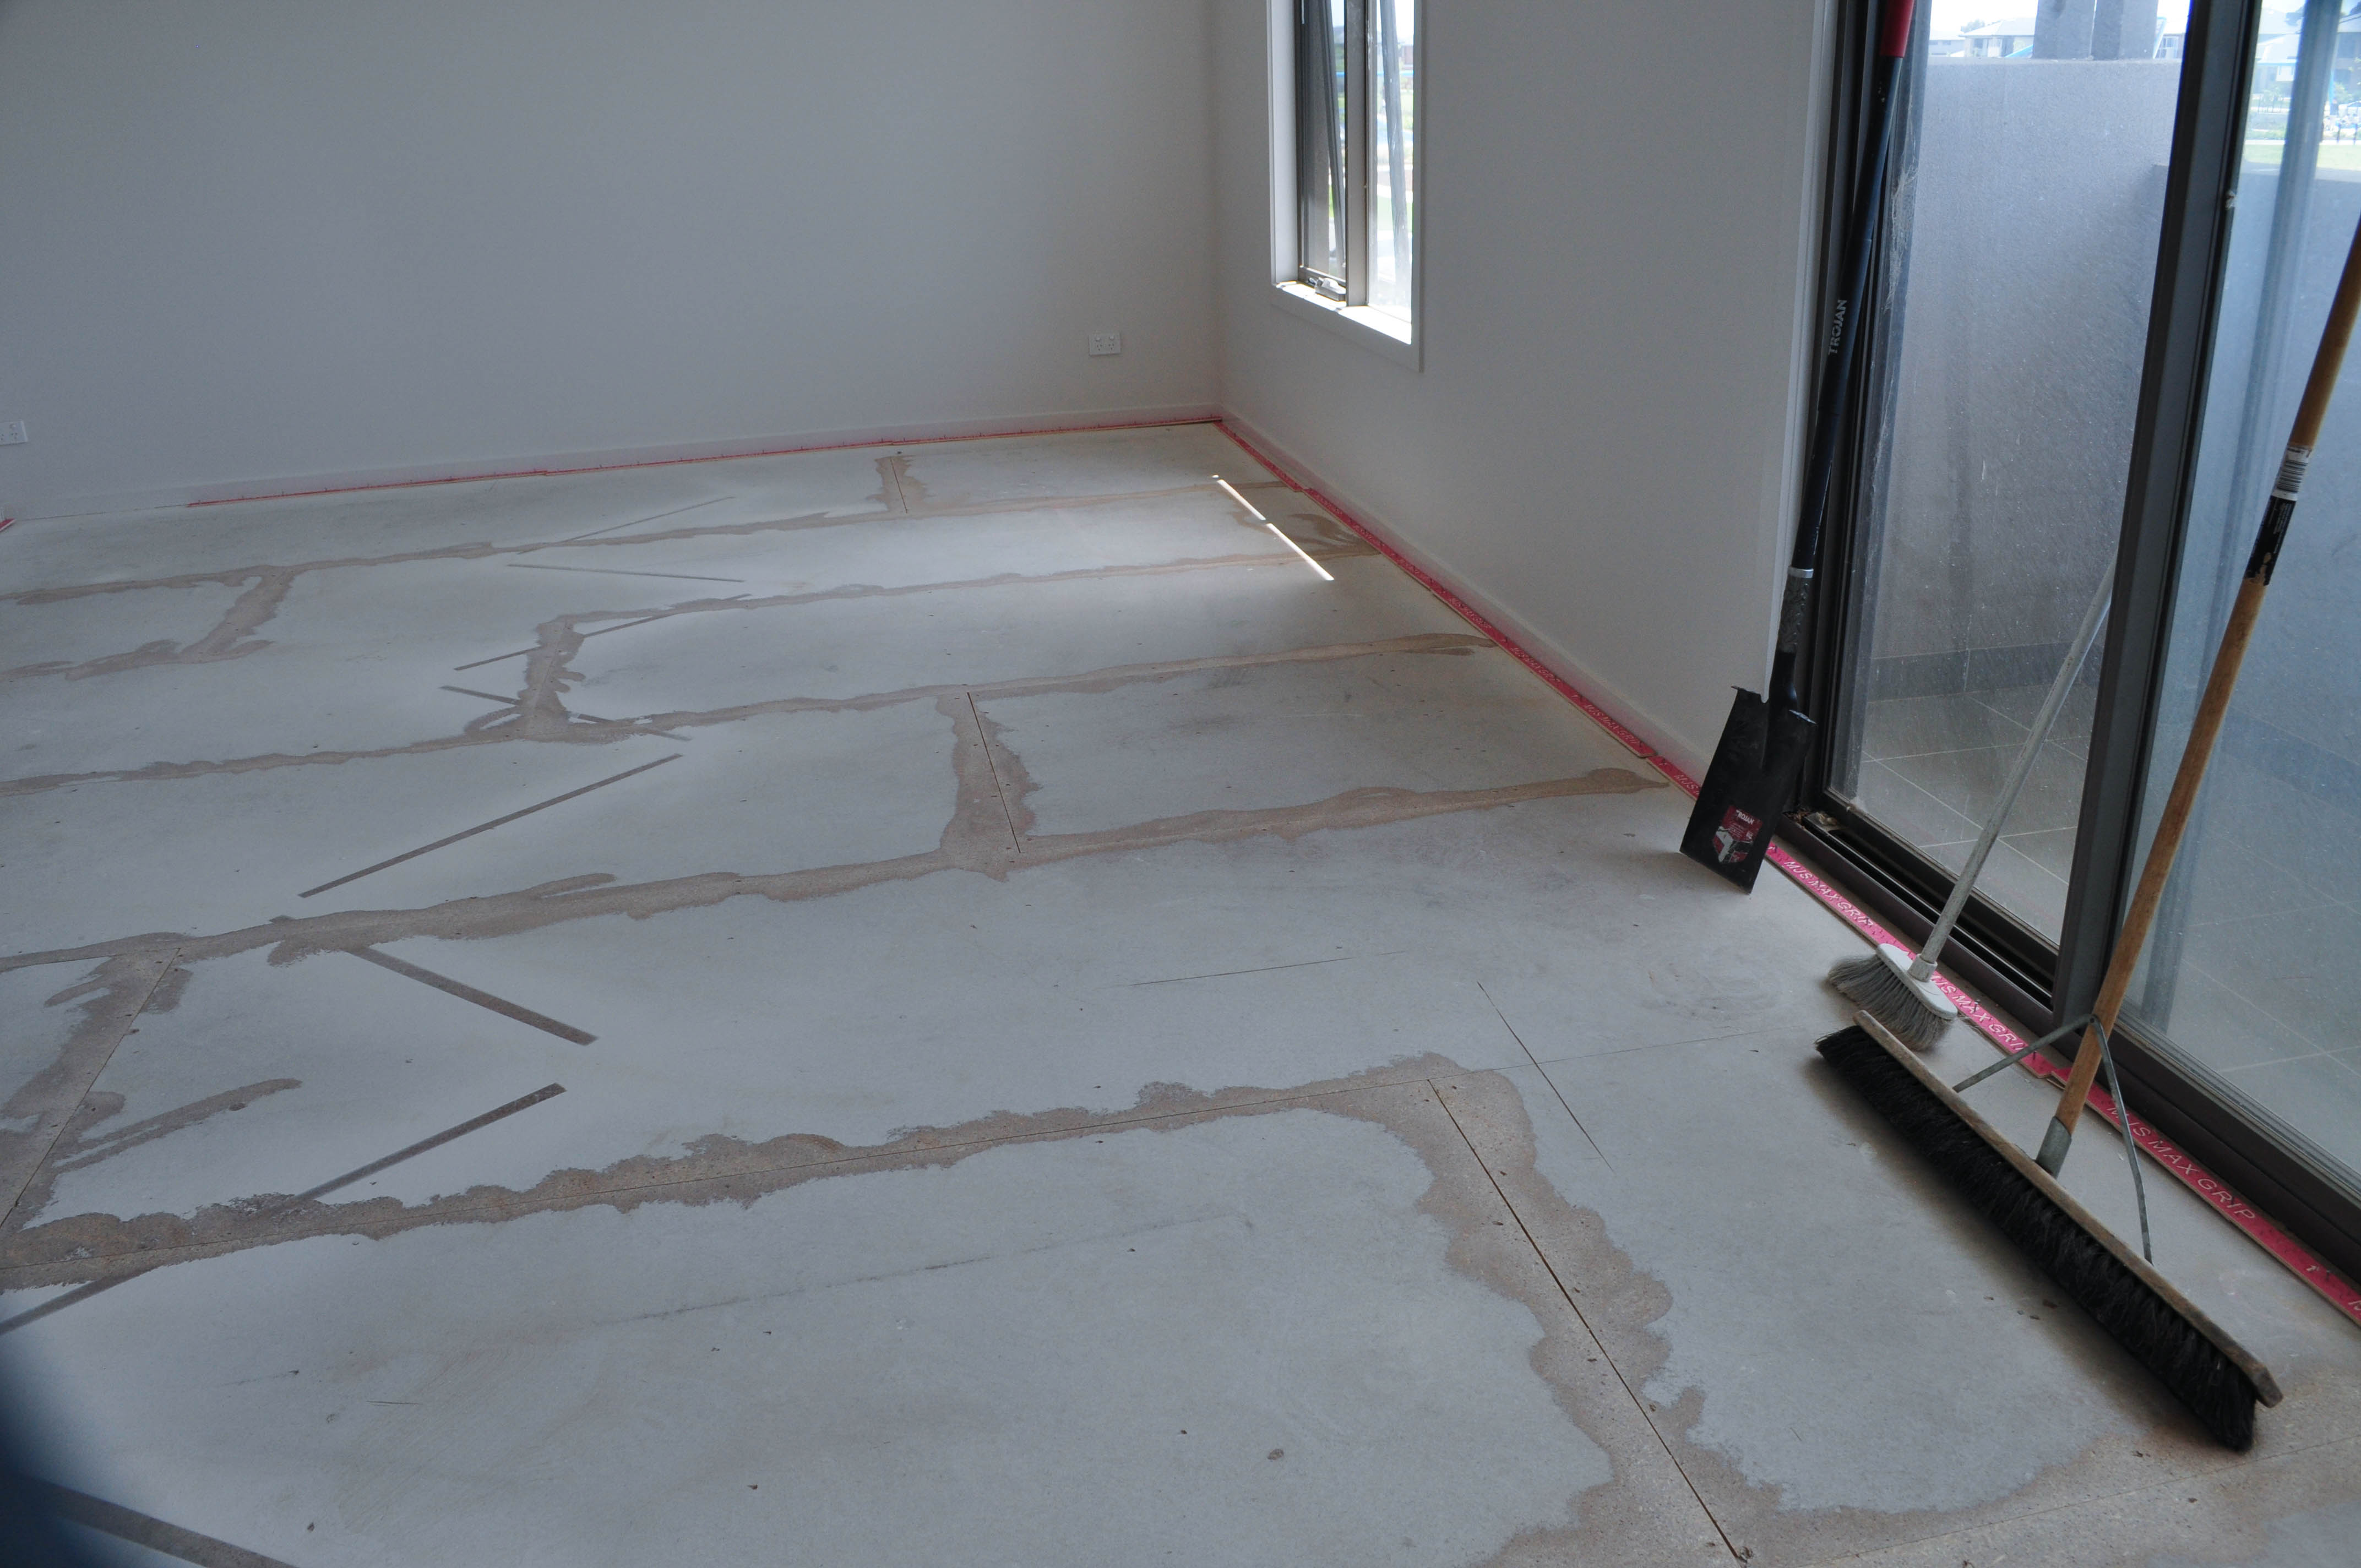 showing a room and its floor where the whole room's floor has been sanded to flatten the cupping particle board edges.